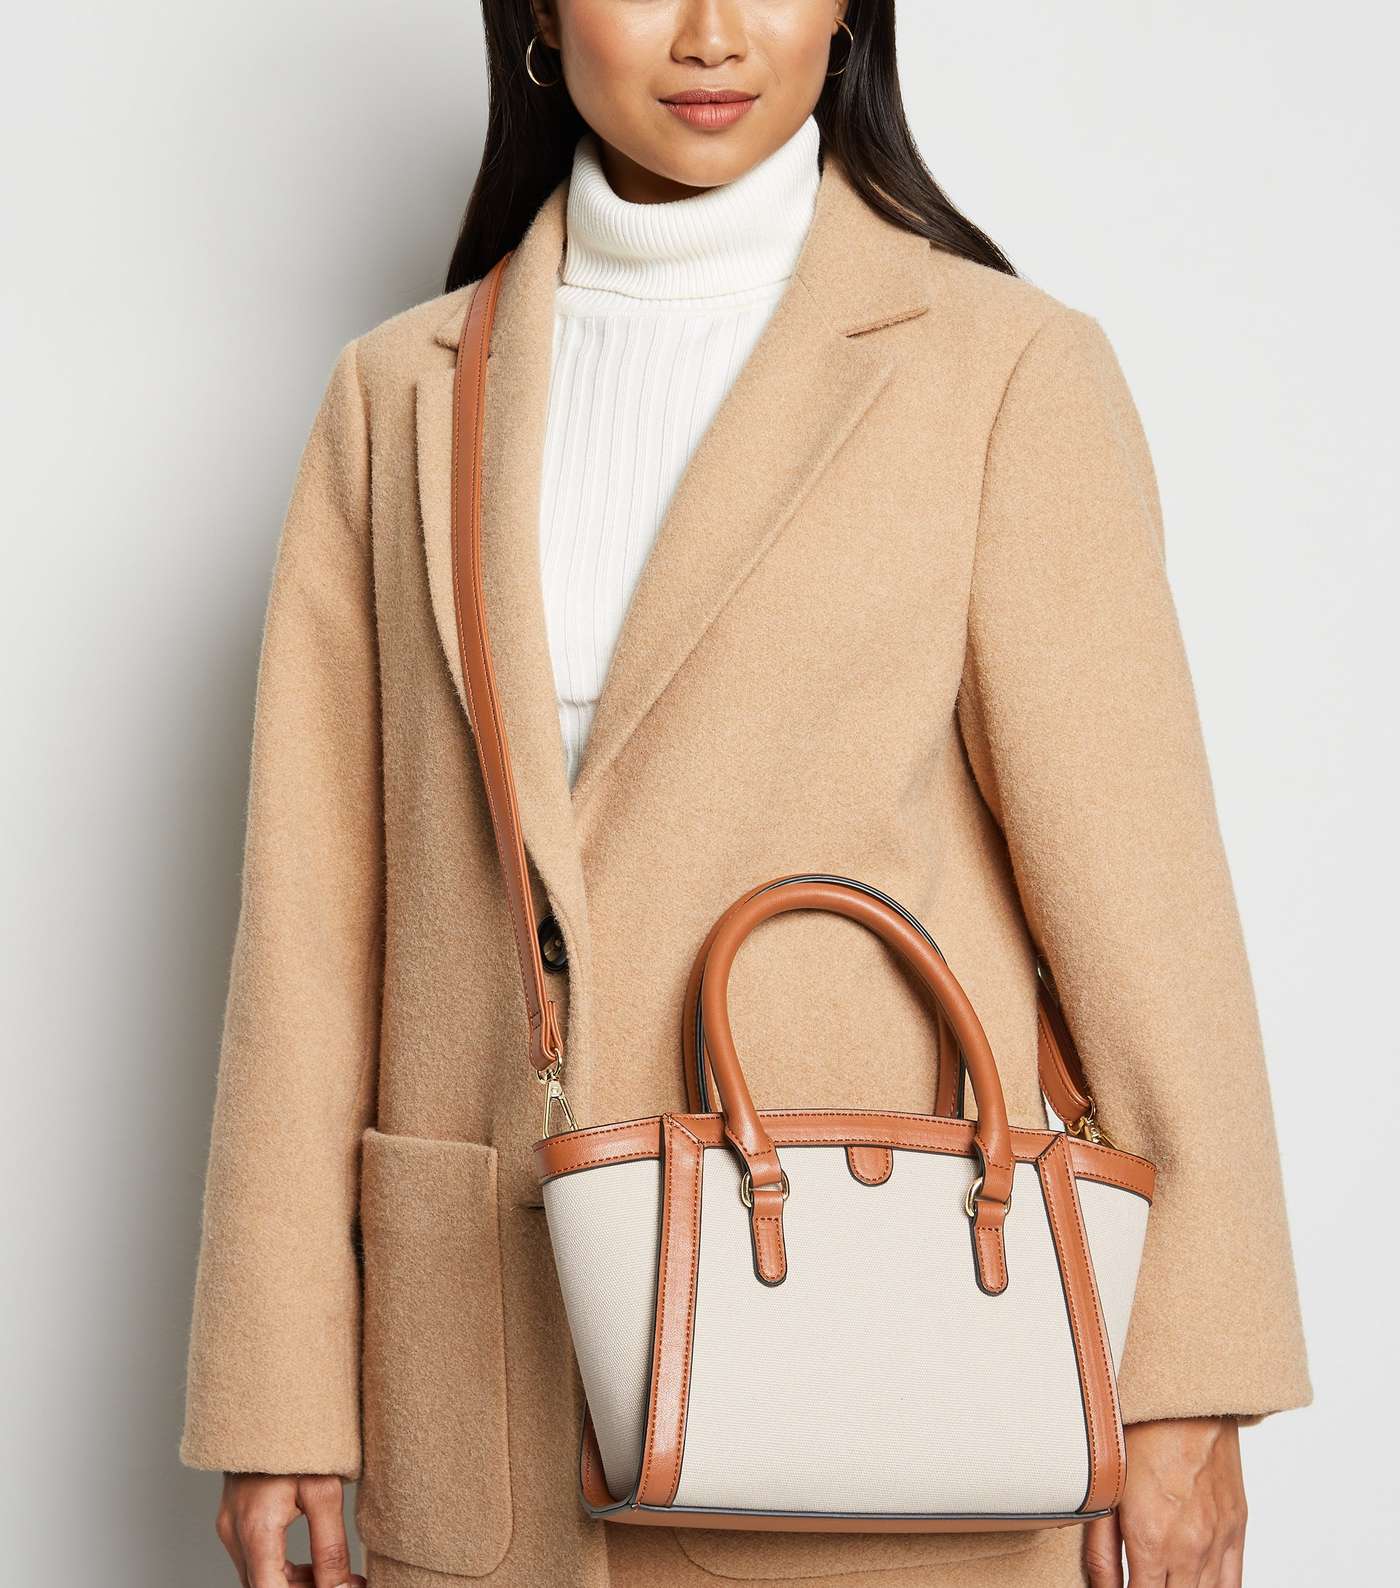 Tan Canvas and Leather-Look Tote Bag Image 2